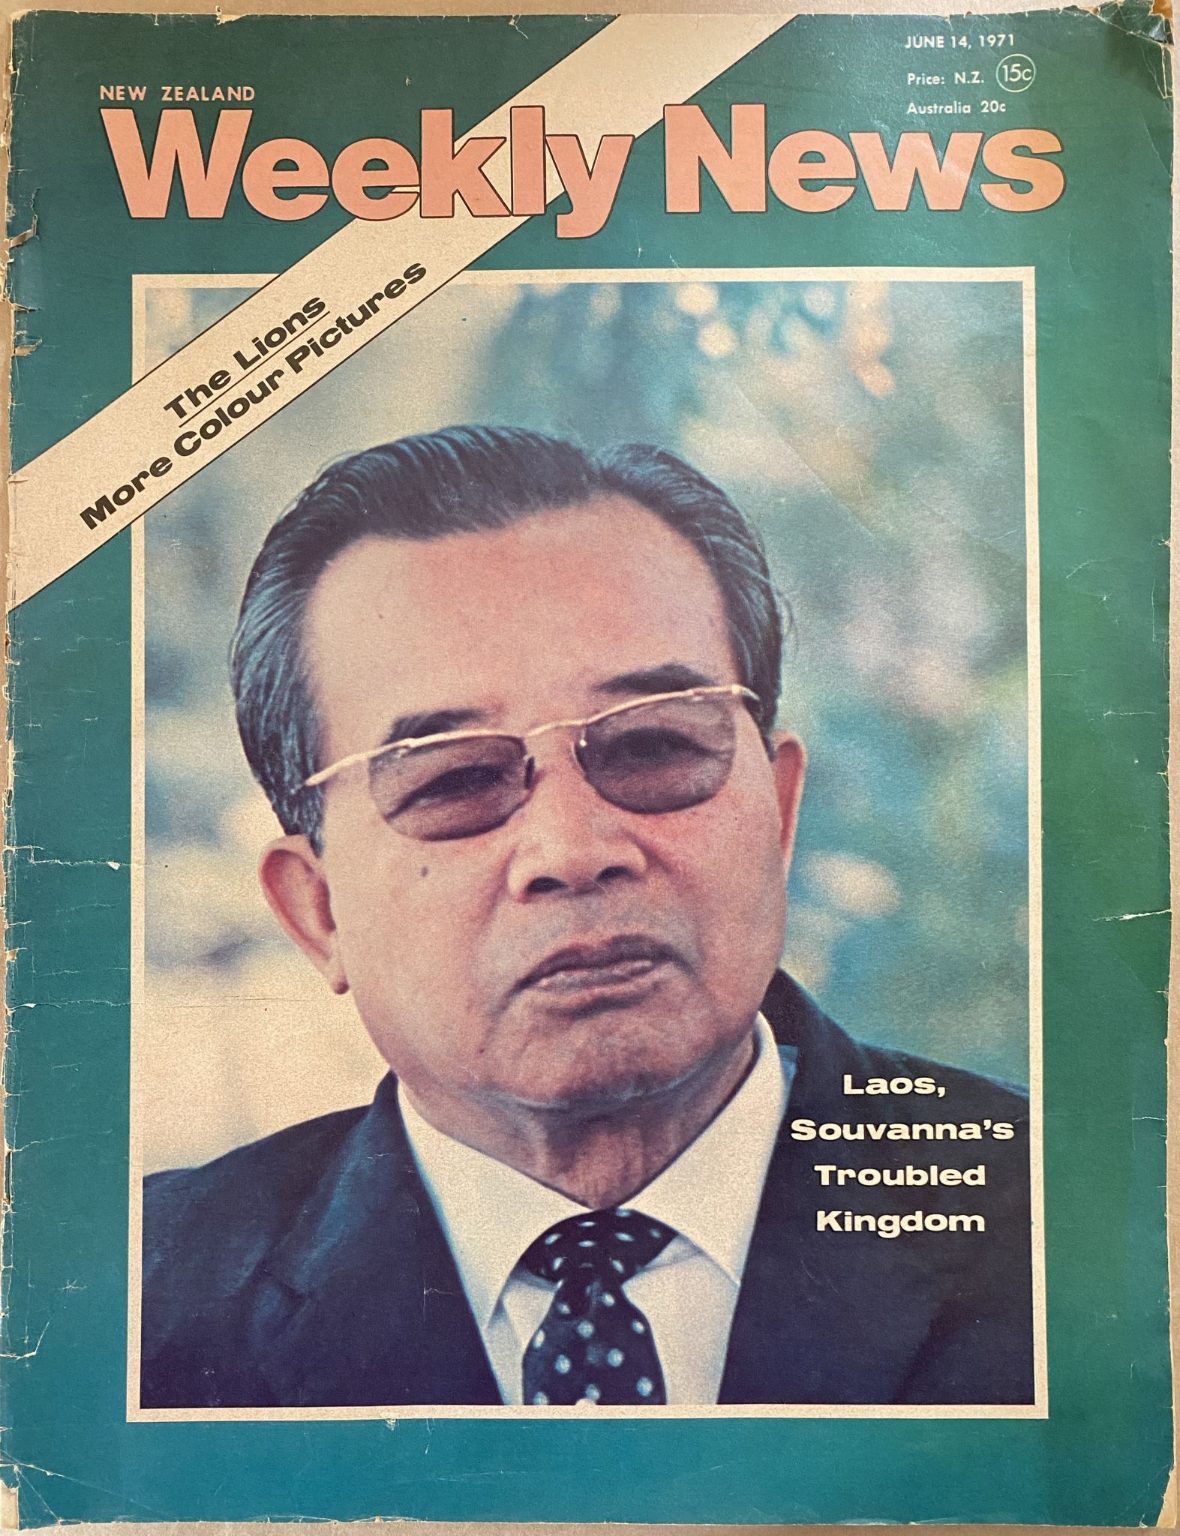 OLD NEWSPAPER: New Zealand Weekly News, No. 5610, 14 June 1971